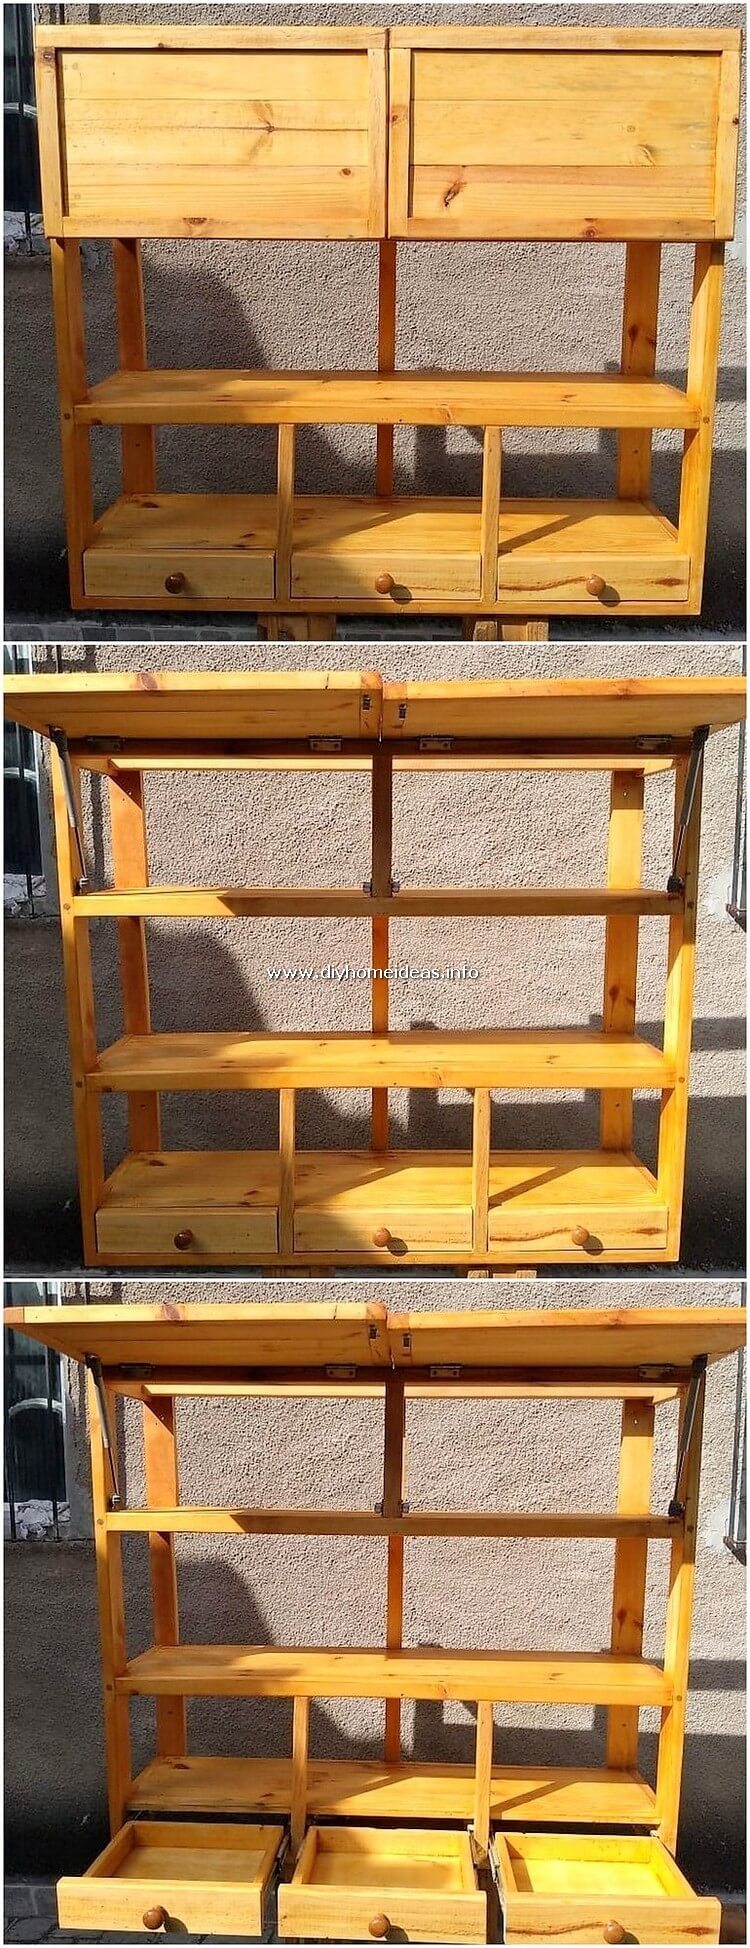 Pallet Shelving Table with Drawers